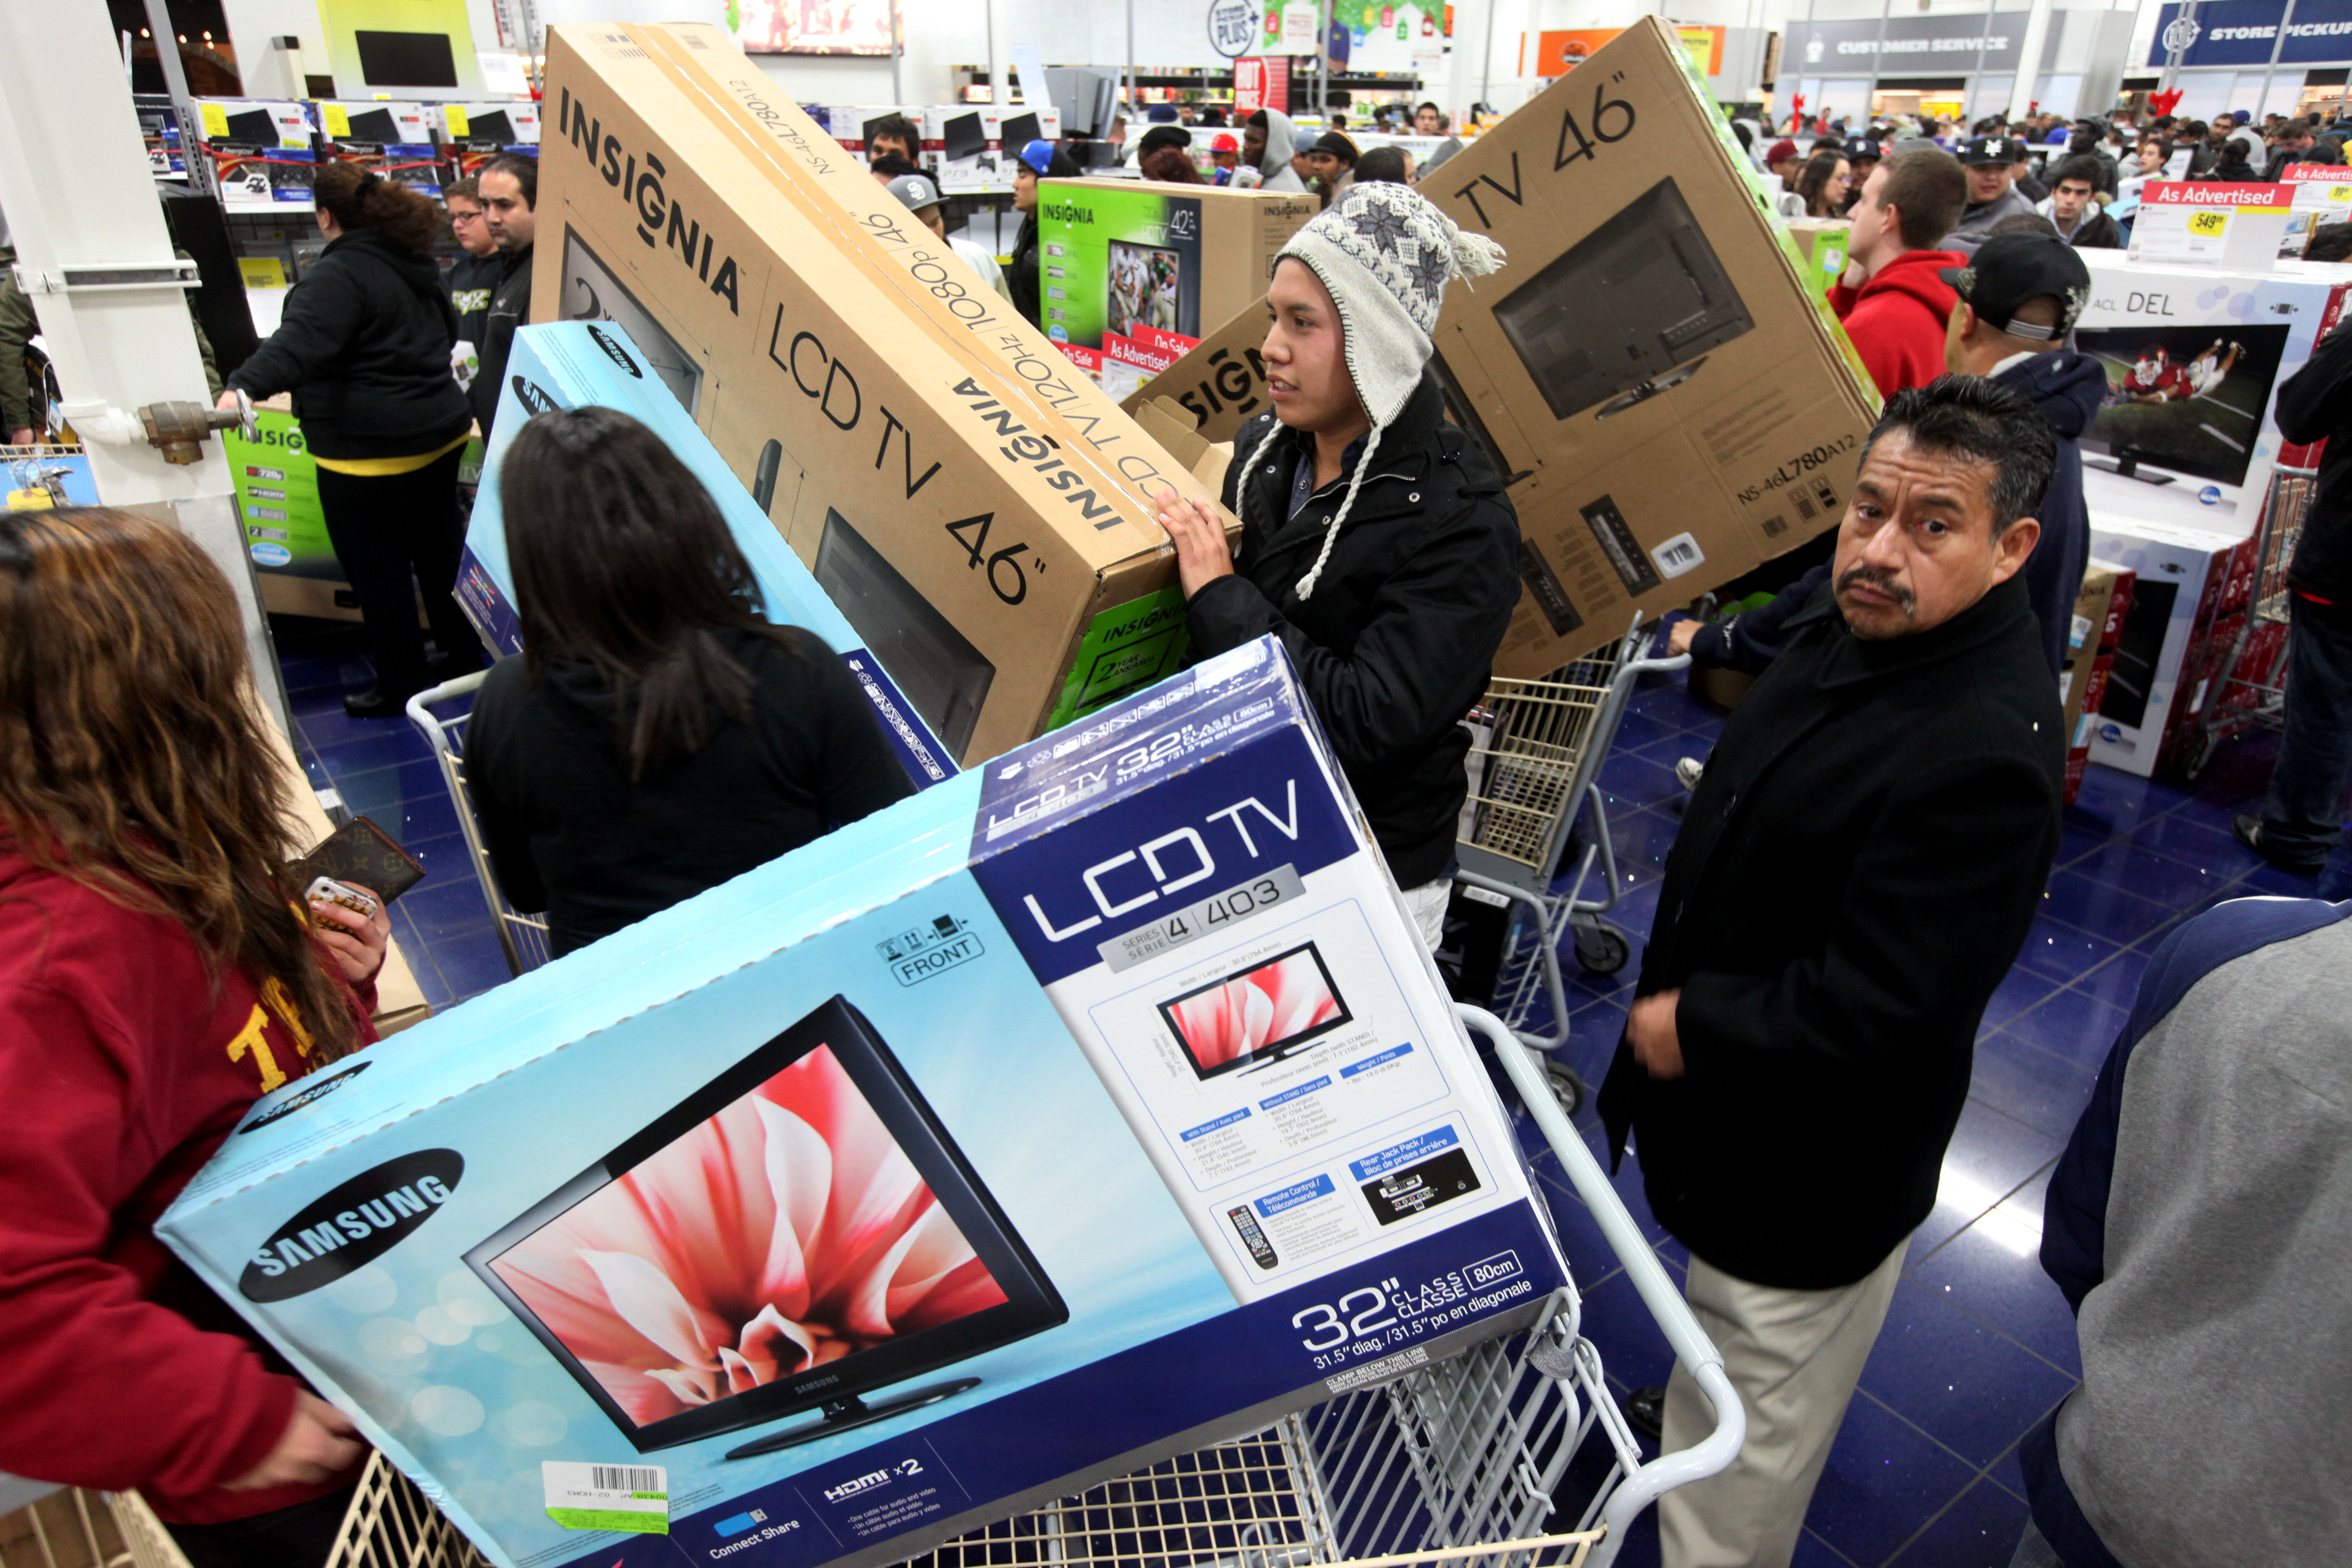 SAN DIEGO, CA - NOVEMBER 25: Customers shop for electronics items during 'Black Friday' at a Best Buy store on November 25, 2011 San Diego, California. Thousands of consumers are queuing at various stores across the nation to take advantage of 'Black Friday' deals as the holiday shopping season begins in America. (Photo by Sandy Huffaker/Getty Images)